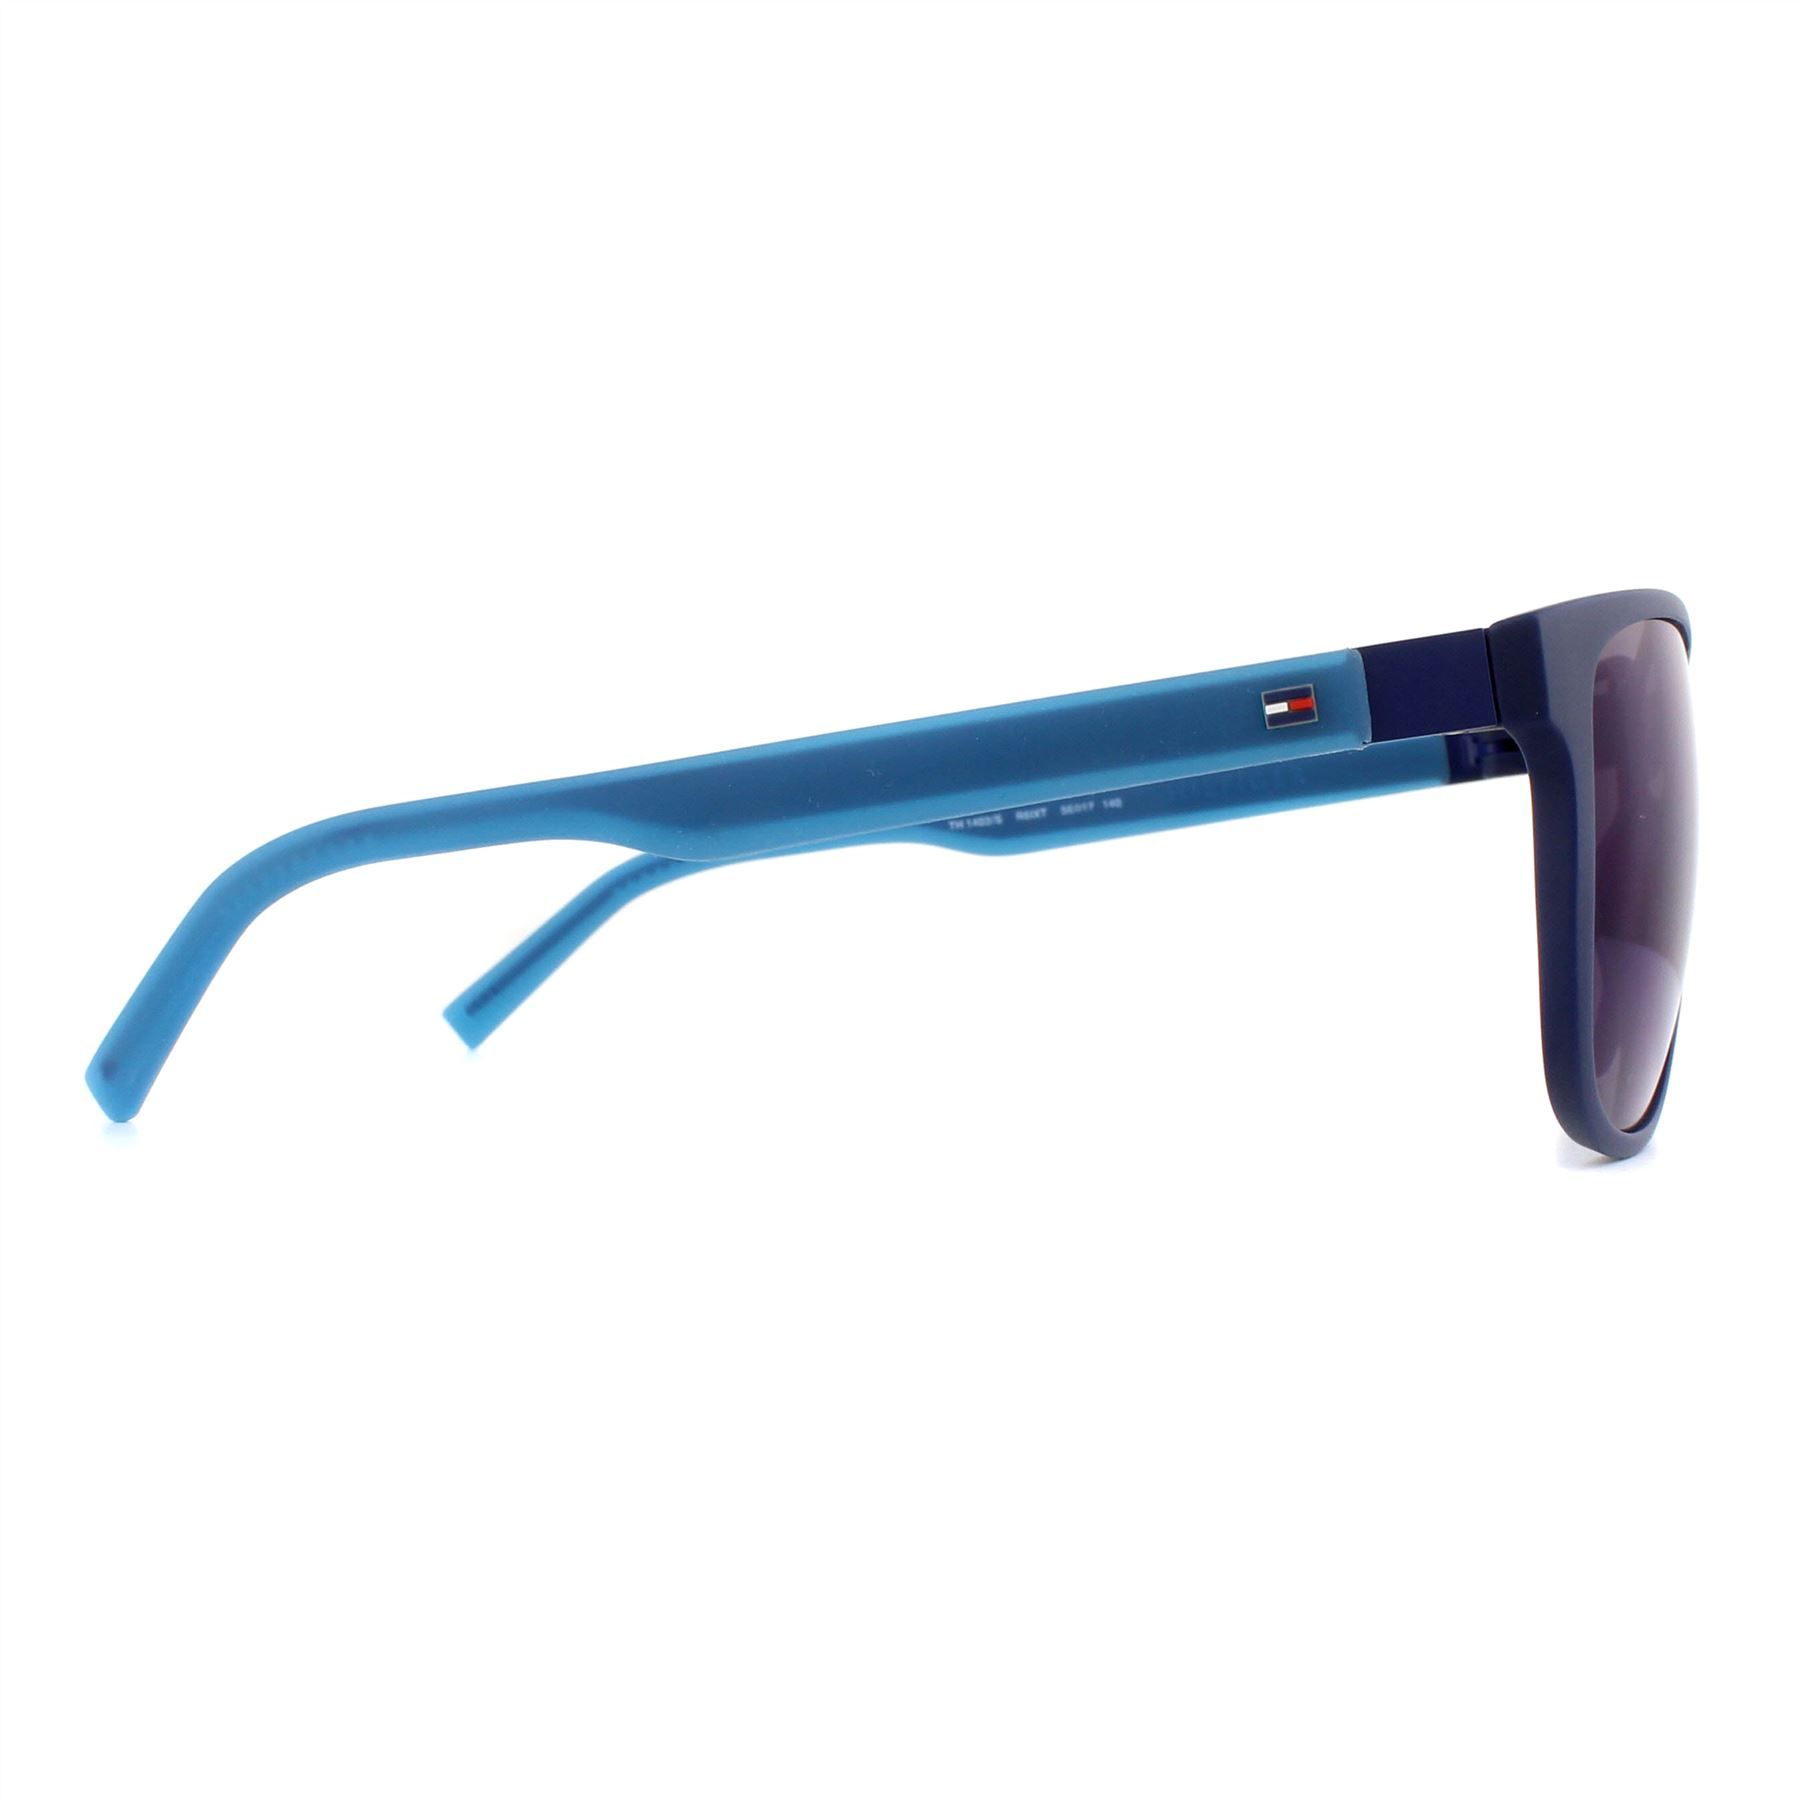 Tommy Hilfiger Sunglasses TH 1403/S R6I XT Navy Blue Blue Mirror are a bright colourful frame featuring a small Tommy Hilfiger icon at the temples on this simple but effective style.